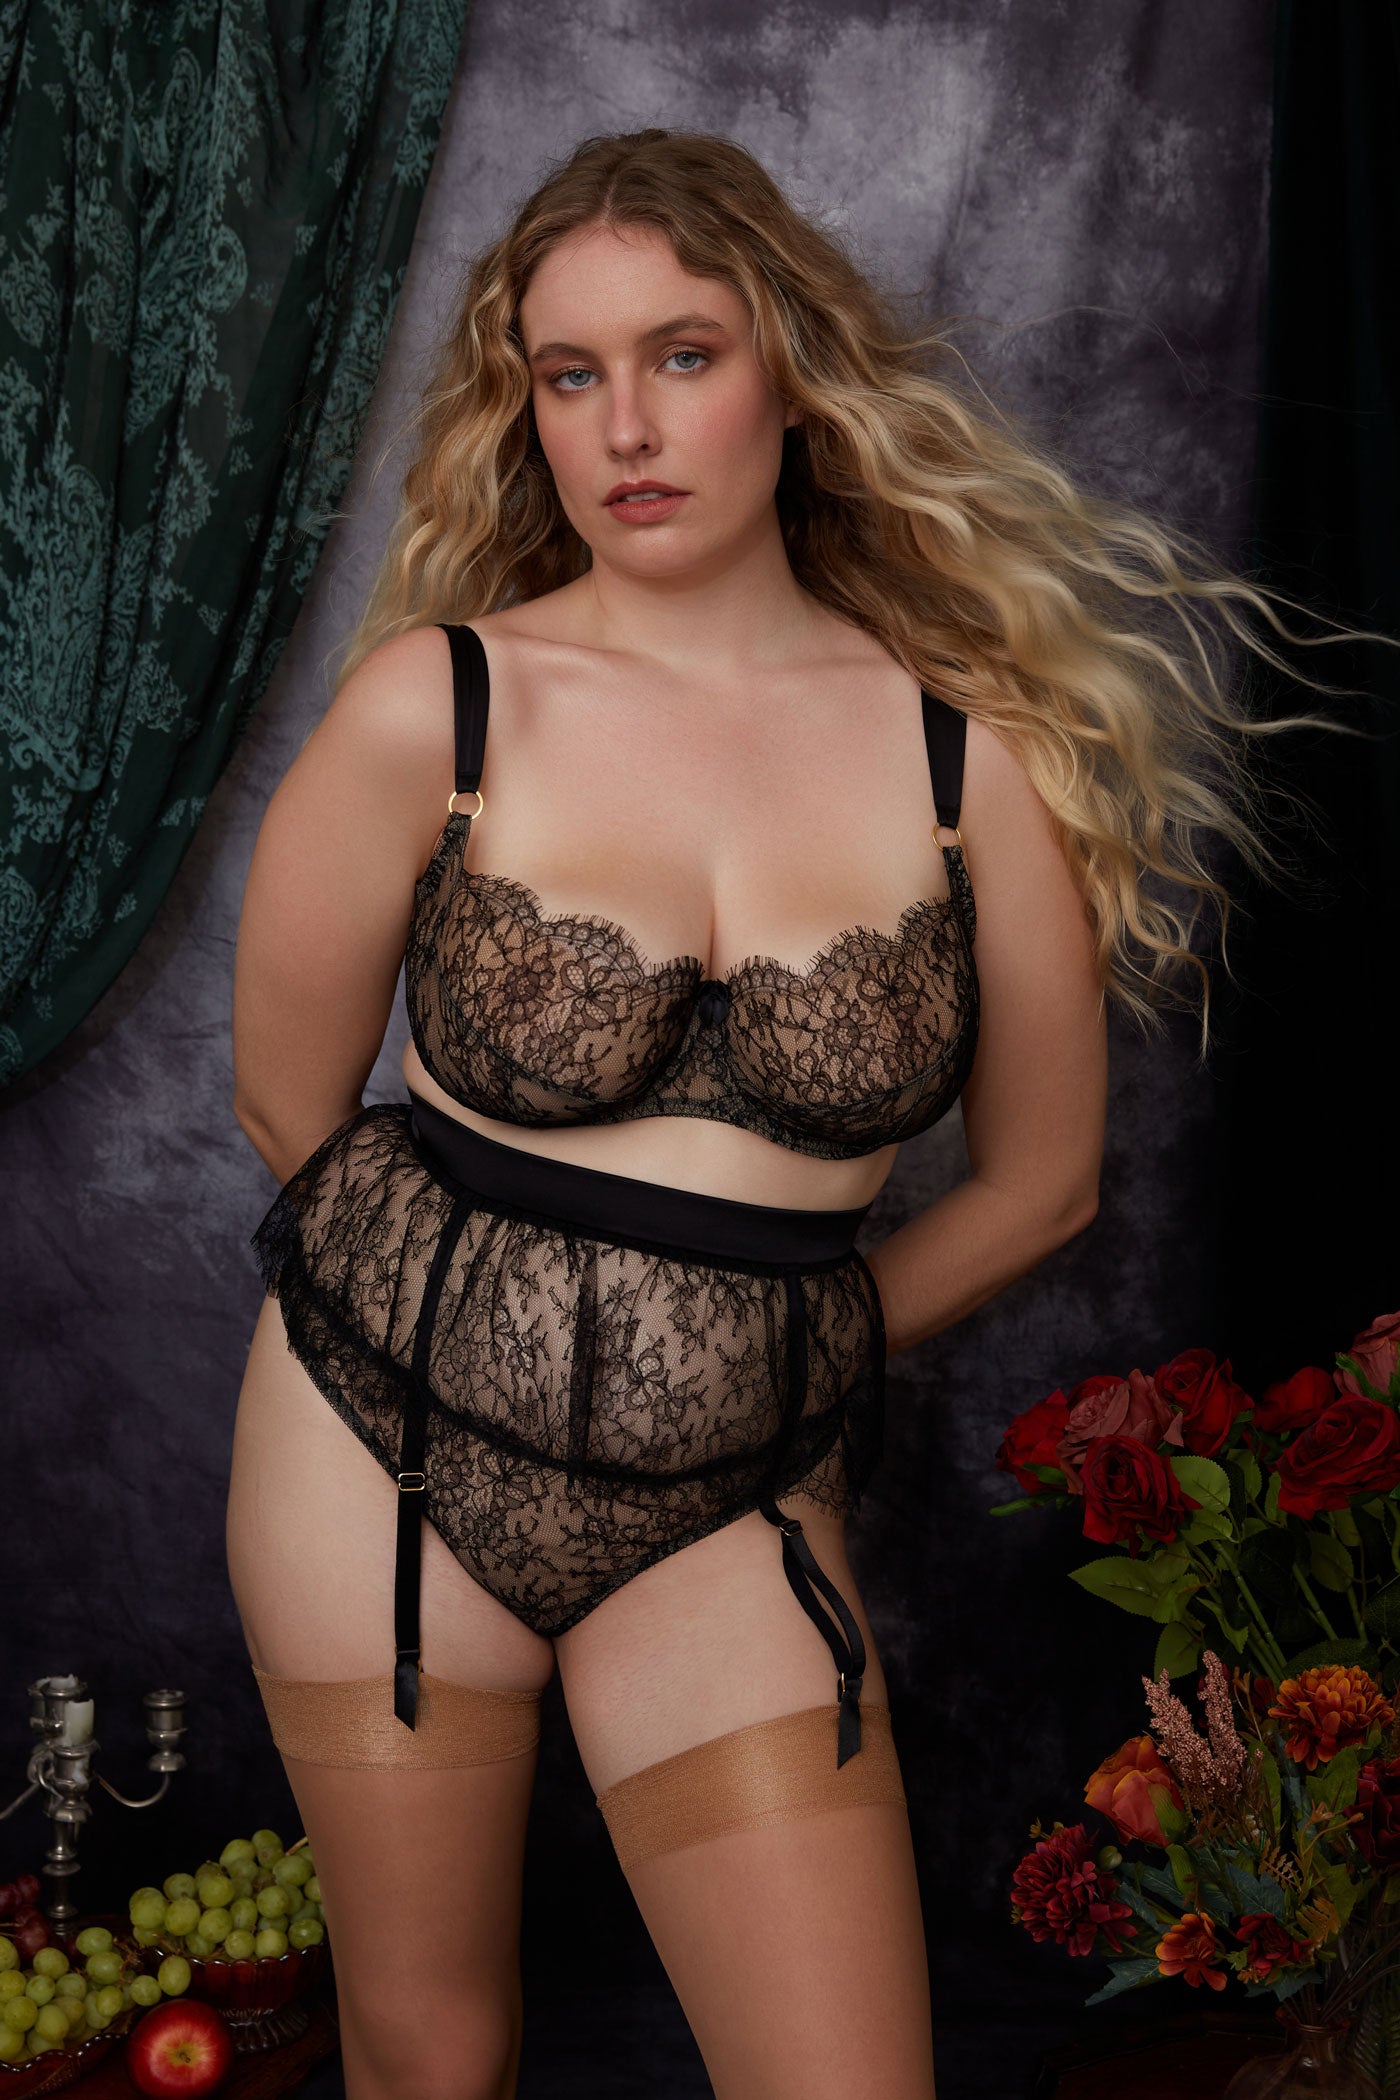 Luxury black lace lingerie set with skirted garter belt, styled with fruit and flowers